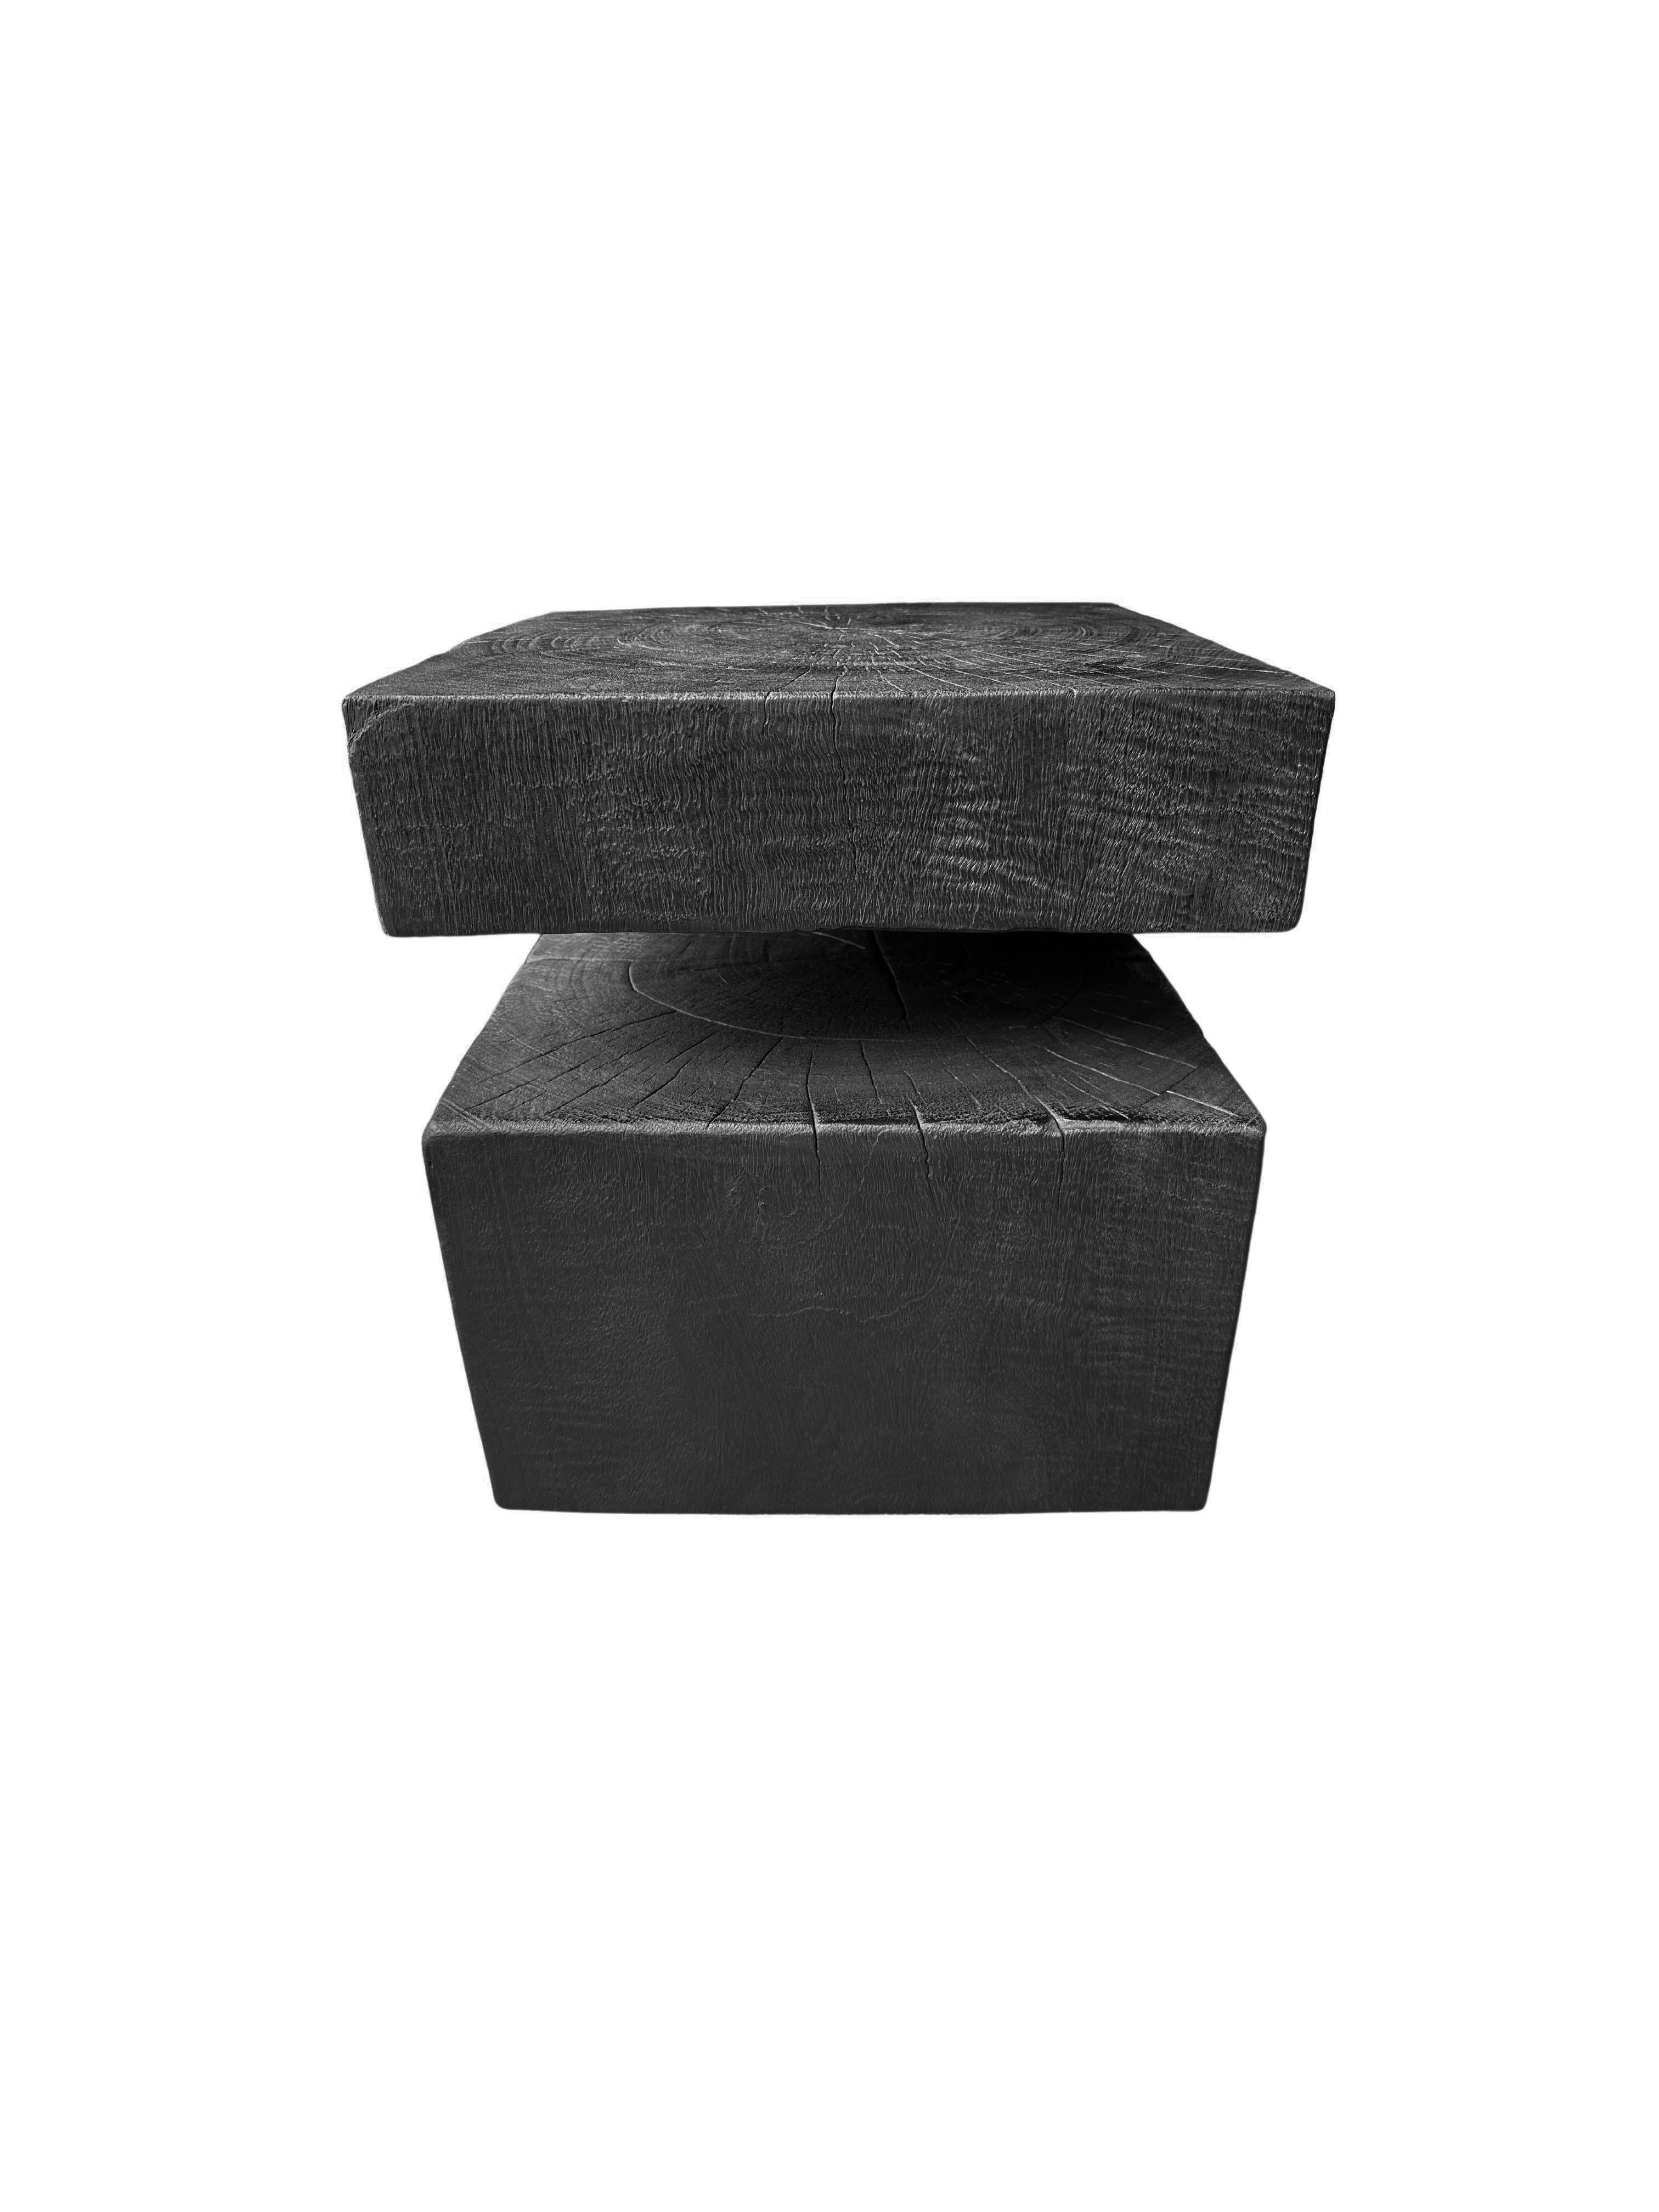 A wonderfully sculptural side table. Its neutral pigment makes it perfect for any space. It was crafted from a solid block of mango wood. To achieve its dark black color the wood was burnt several three times and then coated with clear finish. The